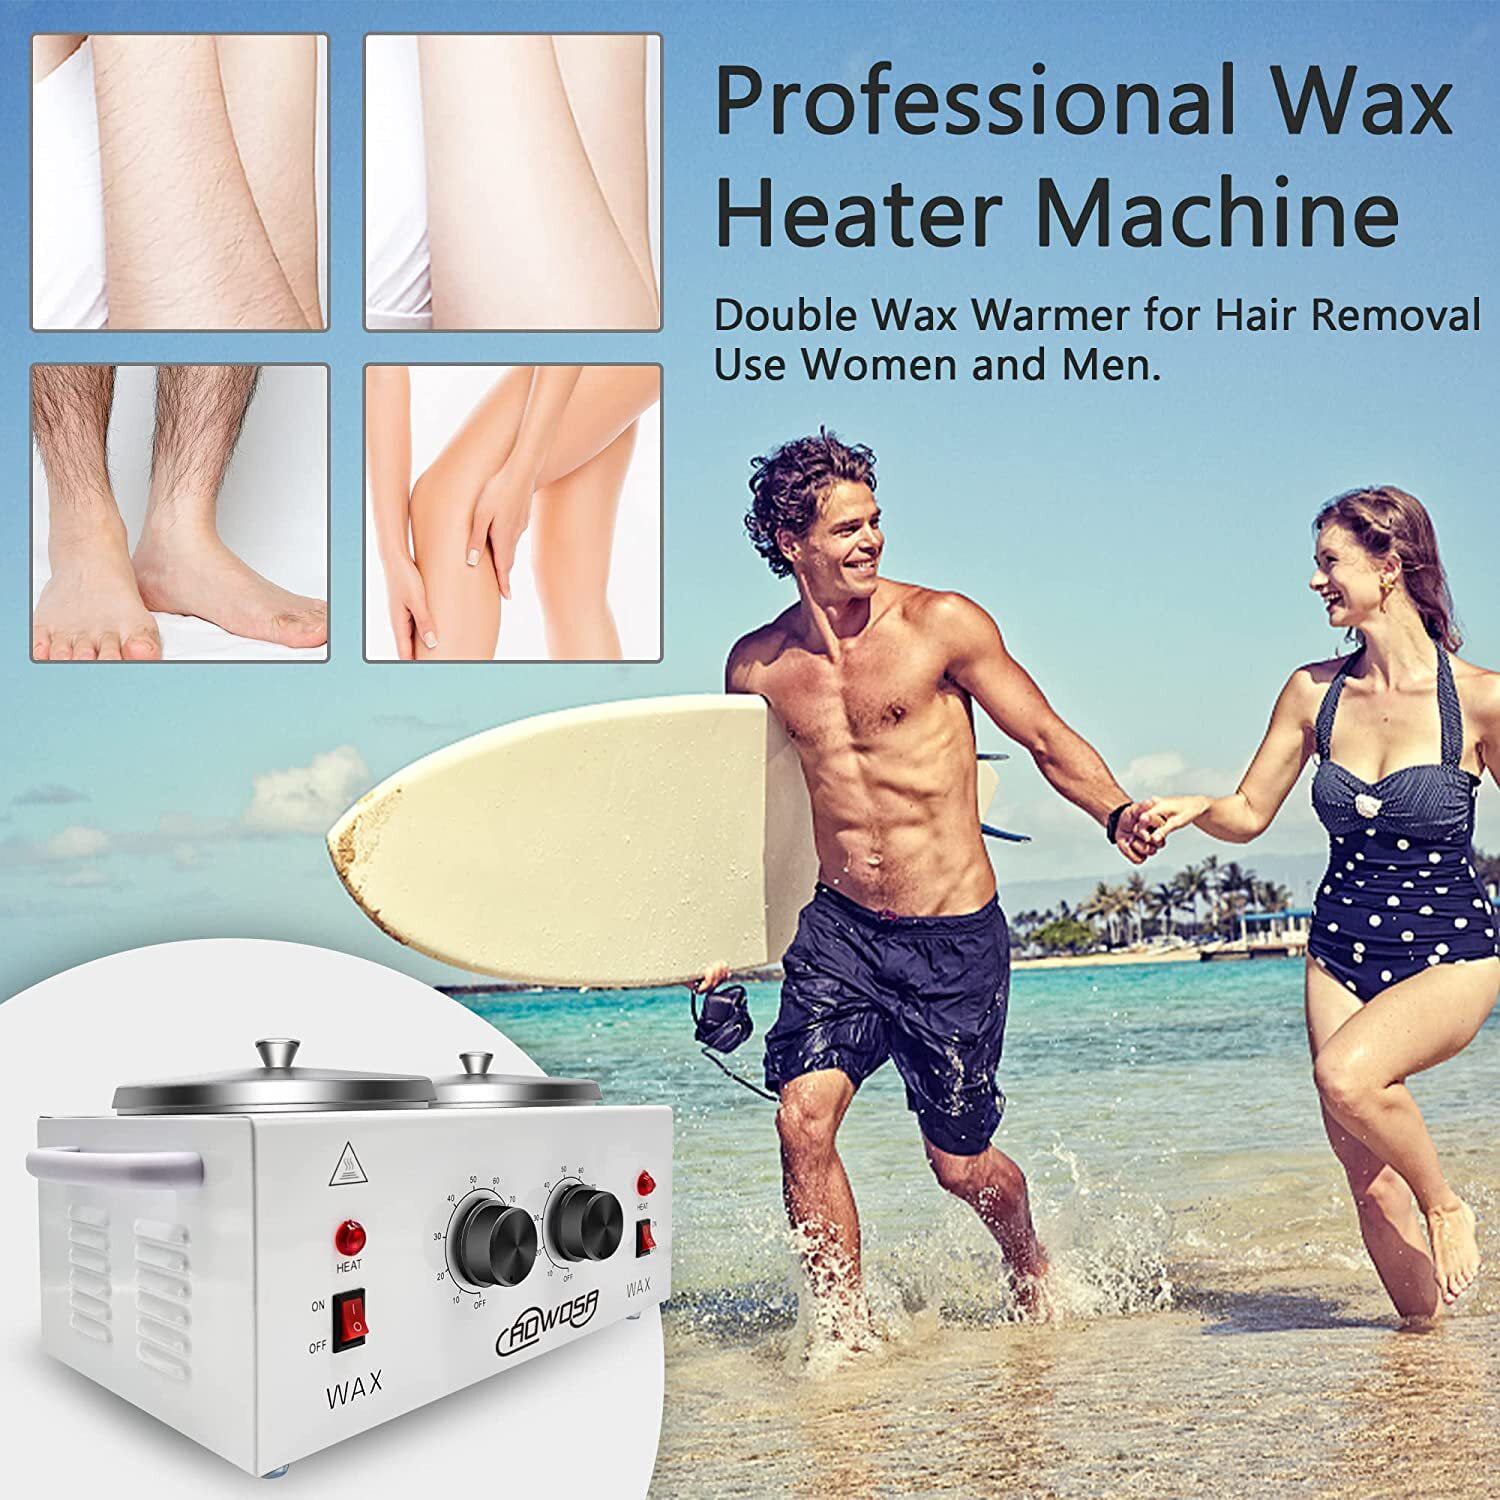 Professional Dual Wax Warmer for Hair Removal, Double Electric Wax Heater  Machine with 100pcs Wax Sticks-Wax Pots with Adjustable Fahrenheit Dial for